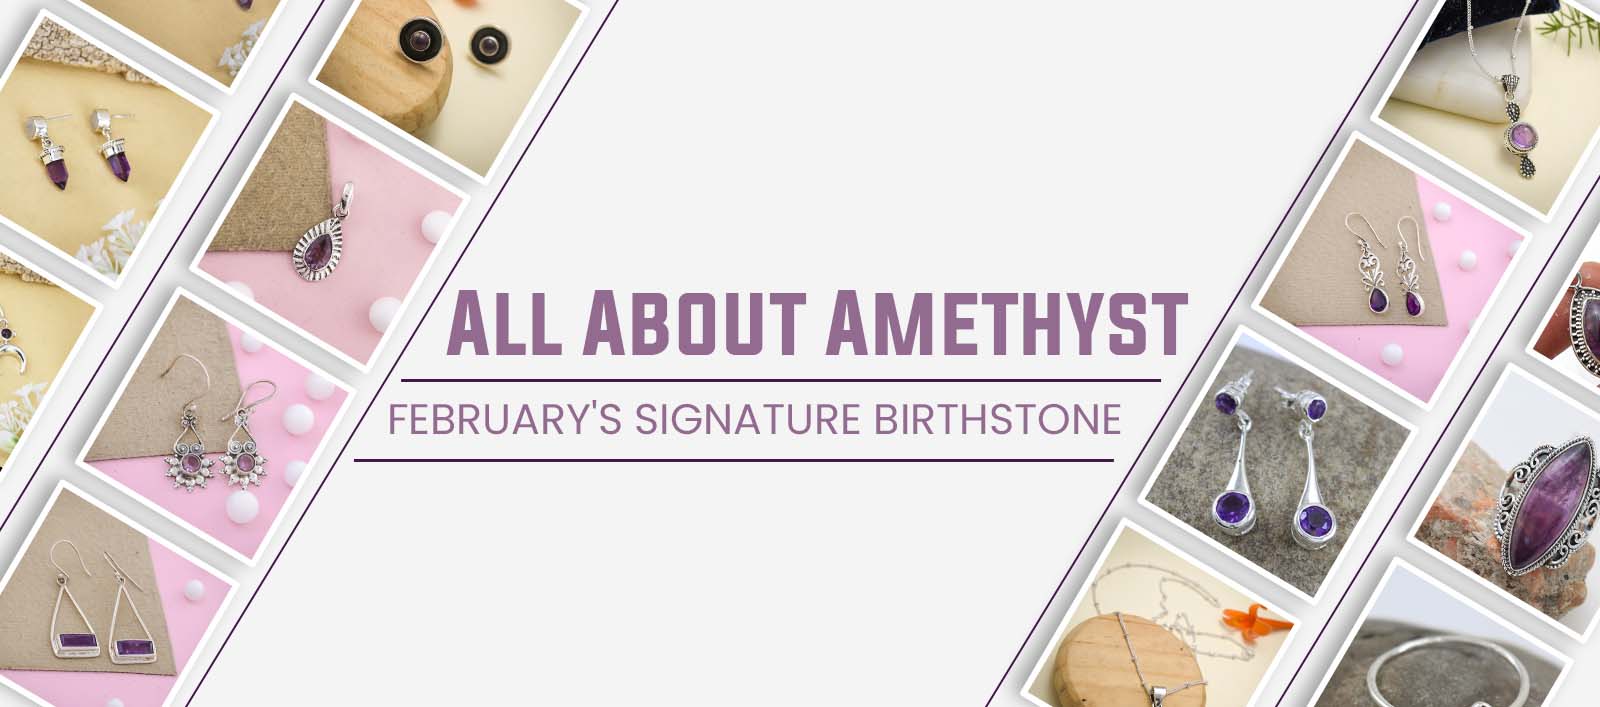 February's Birthstone: All About Amethyst